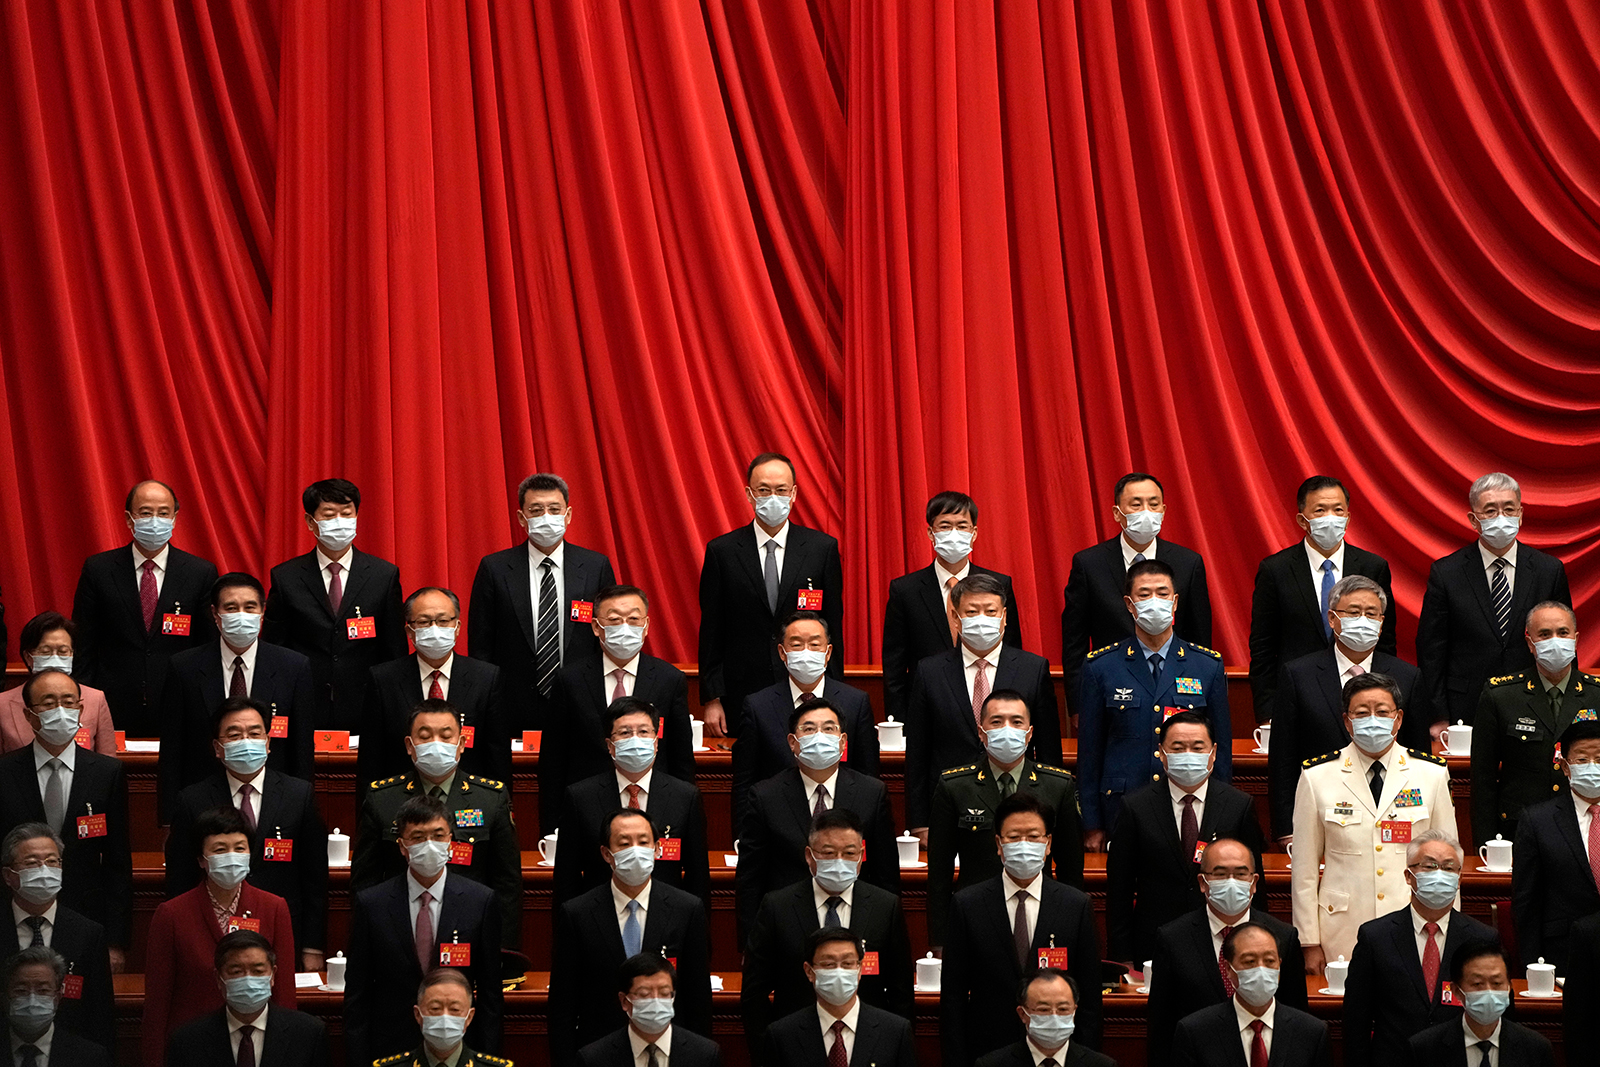 Delegates wear masks as they attend the opening ceremony of the 20th National Congress of China's ruling Communist Party in Beijing on October 16.